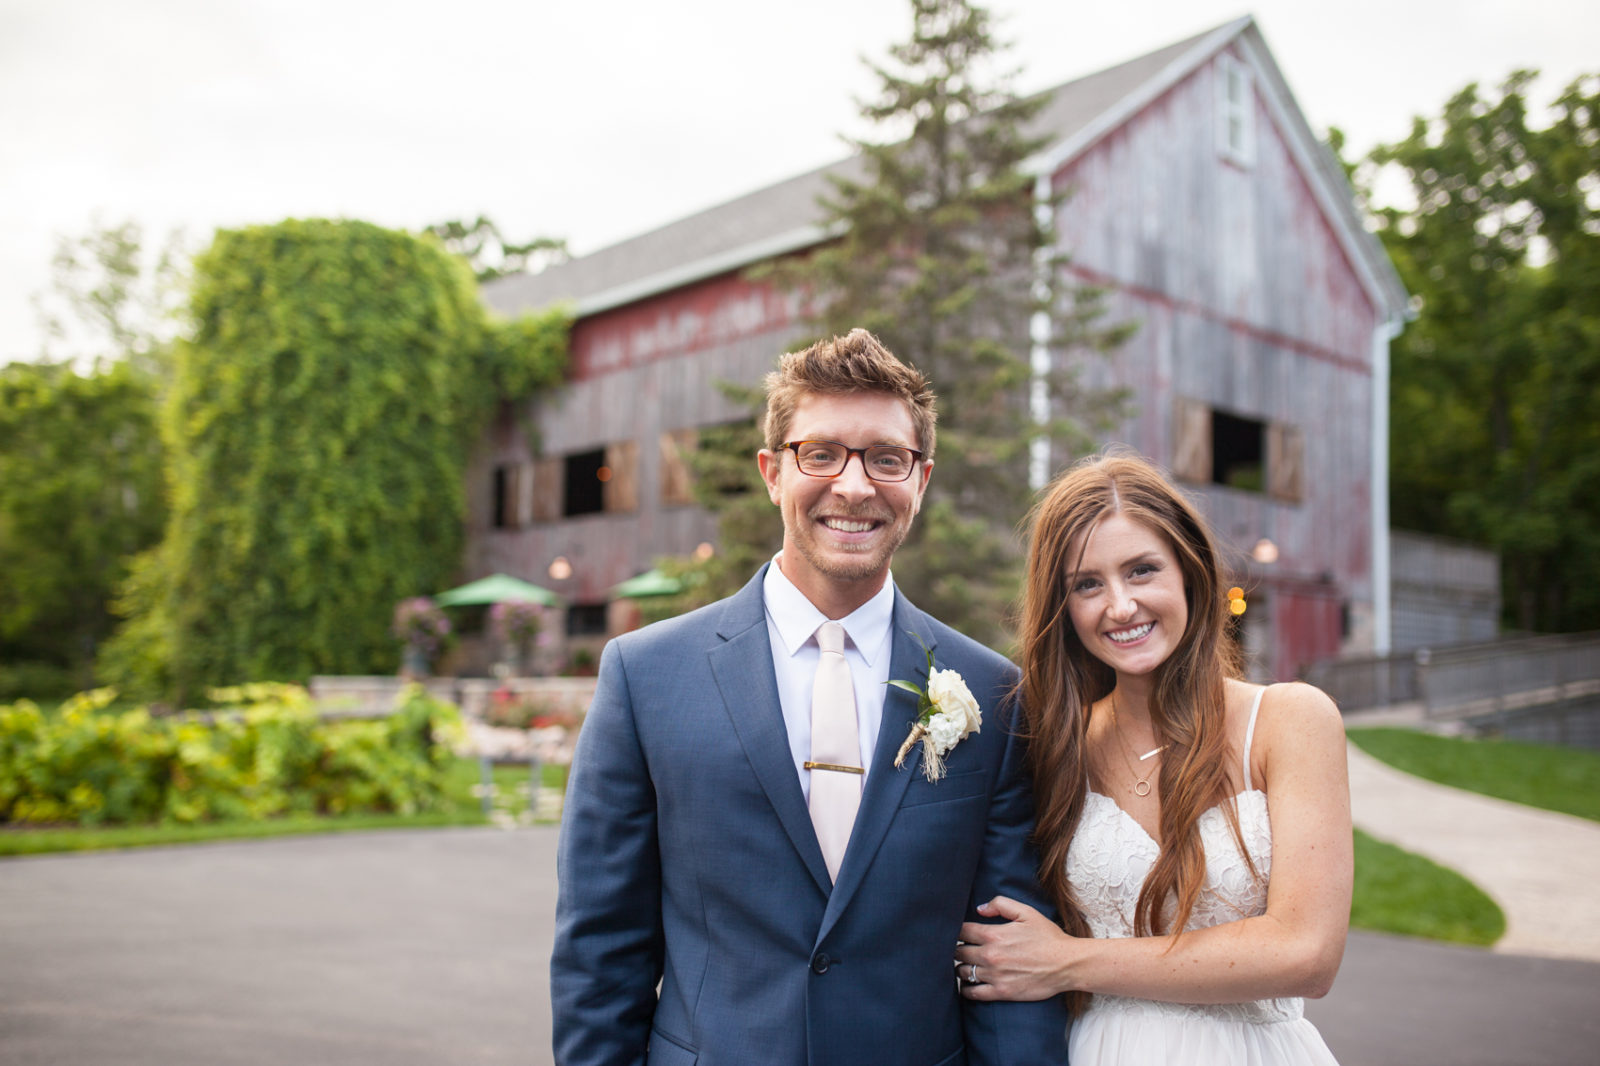 The Farm at Dover Milwaukee Wedding - Brooke & Doug Photography bride and groom dipping in front of barn